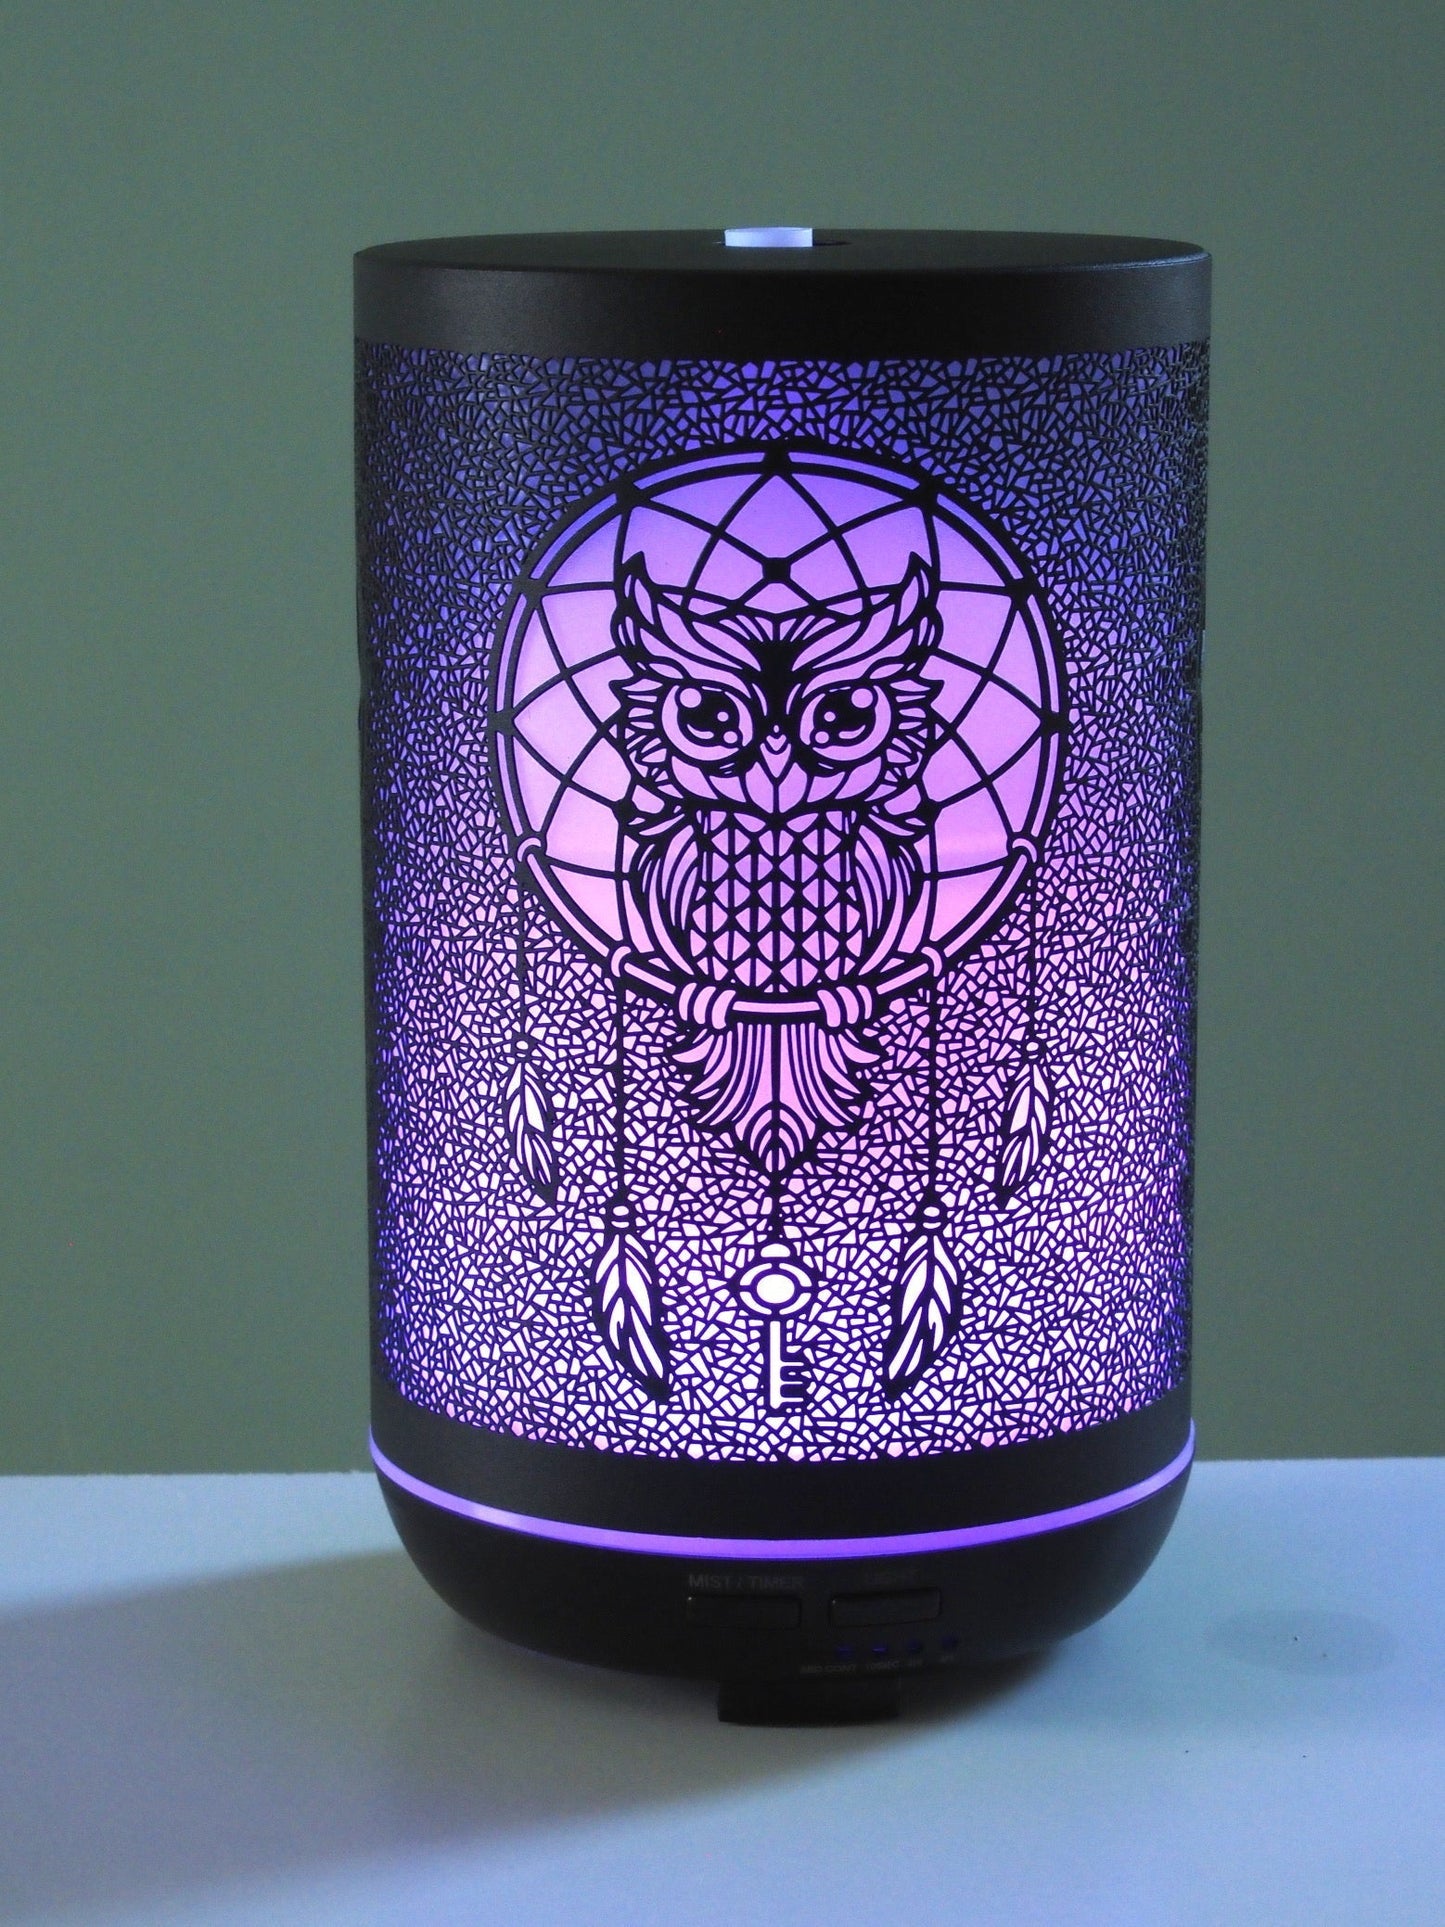 Ancient Infusions Dreamcatcher Owl Aromatherapy Diffuser - Essential Oils Mist.